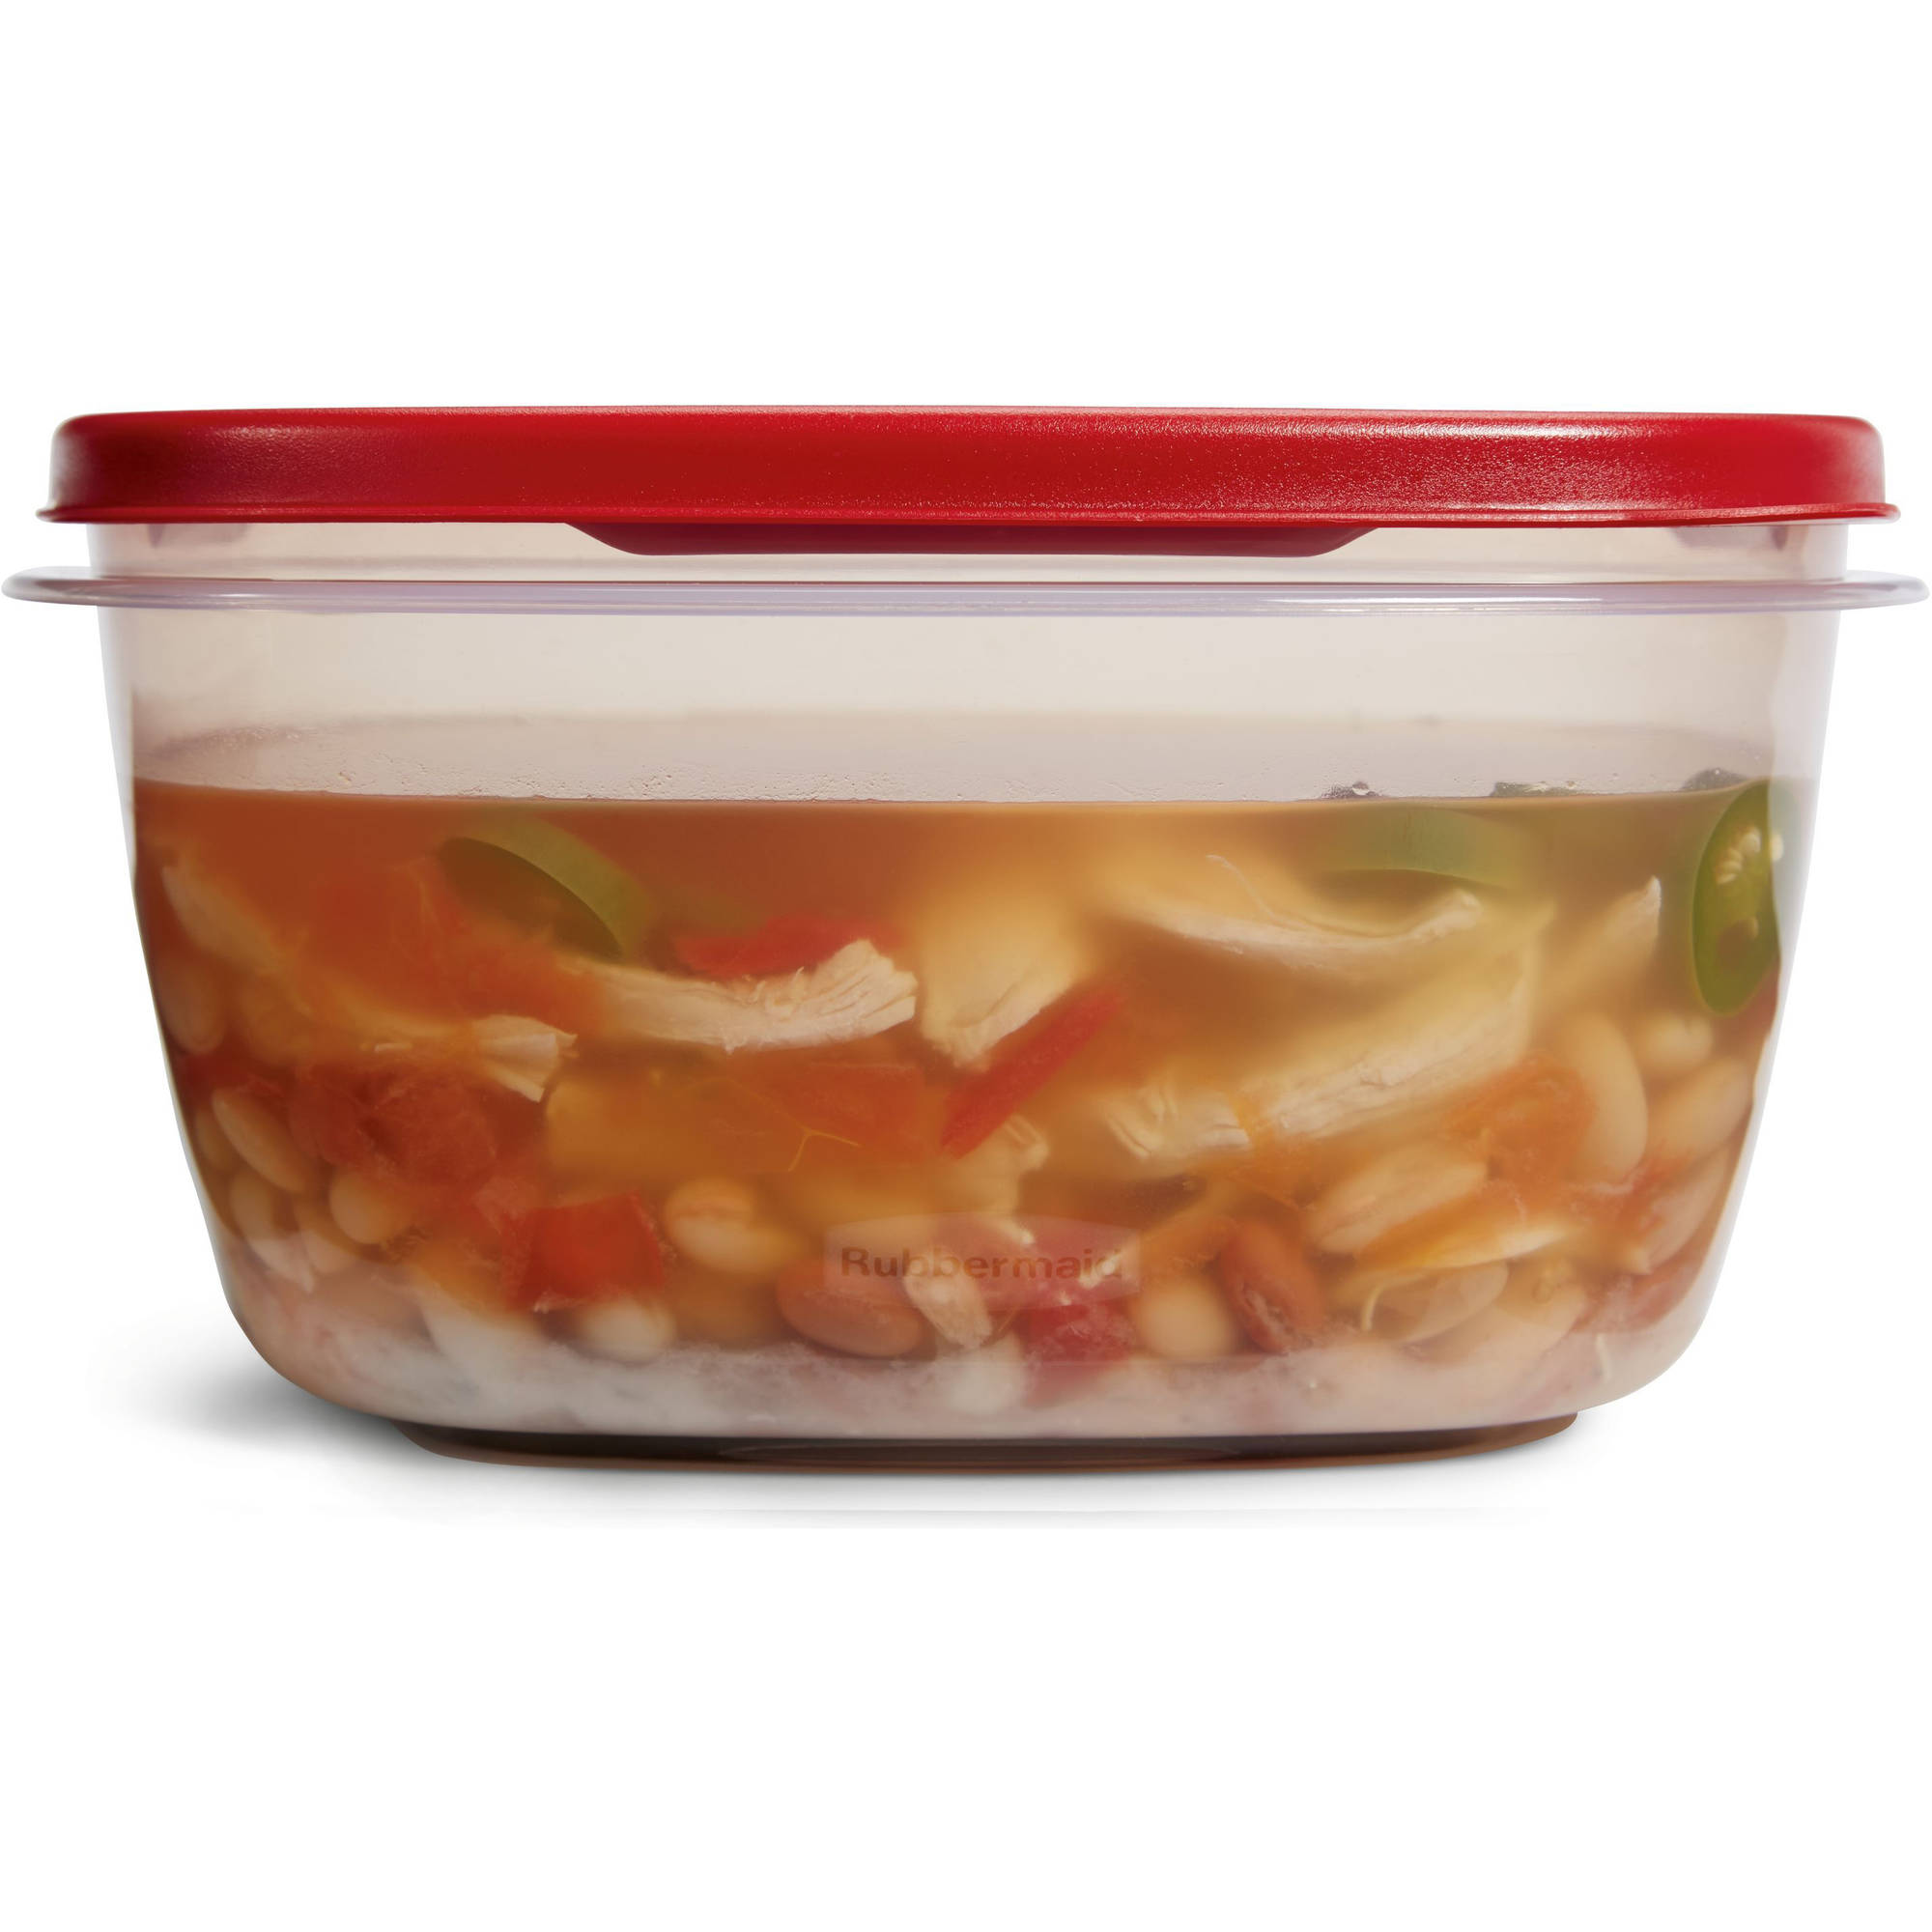 Rubbermaid Easy Find Lids Food Storage and Organization Containers, Set of 20 (40 Pieces Total) - image 5 of 13